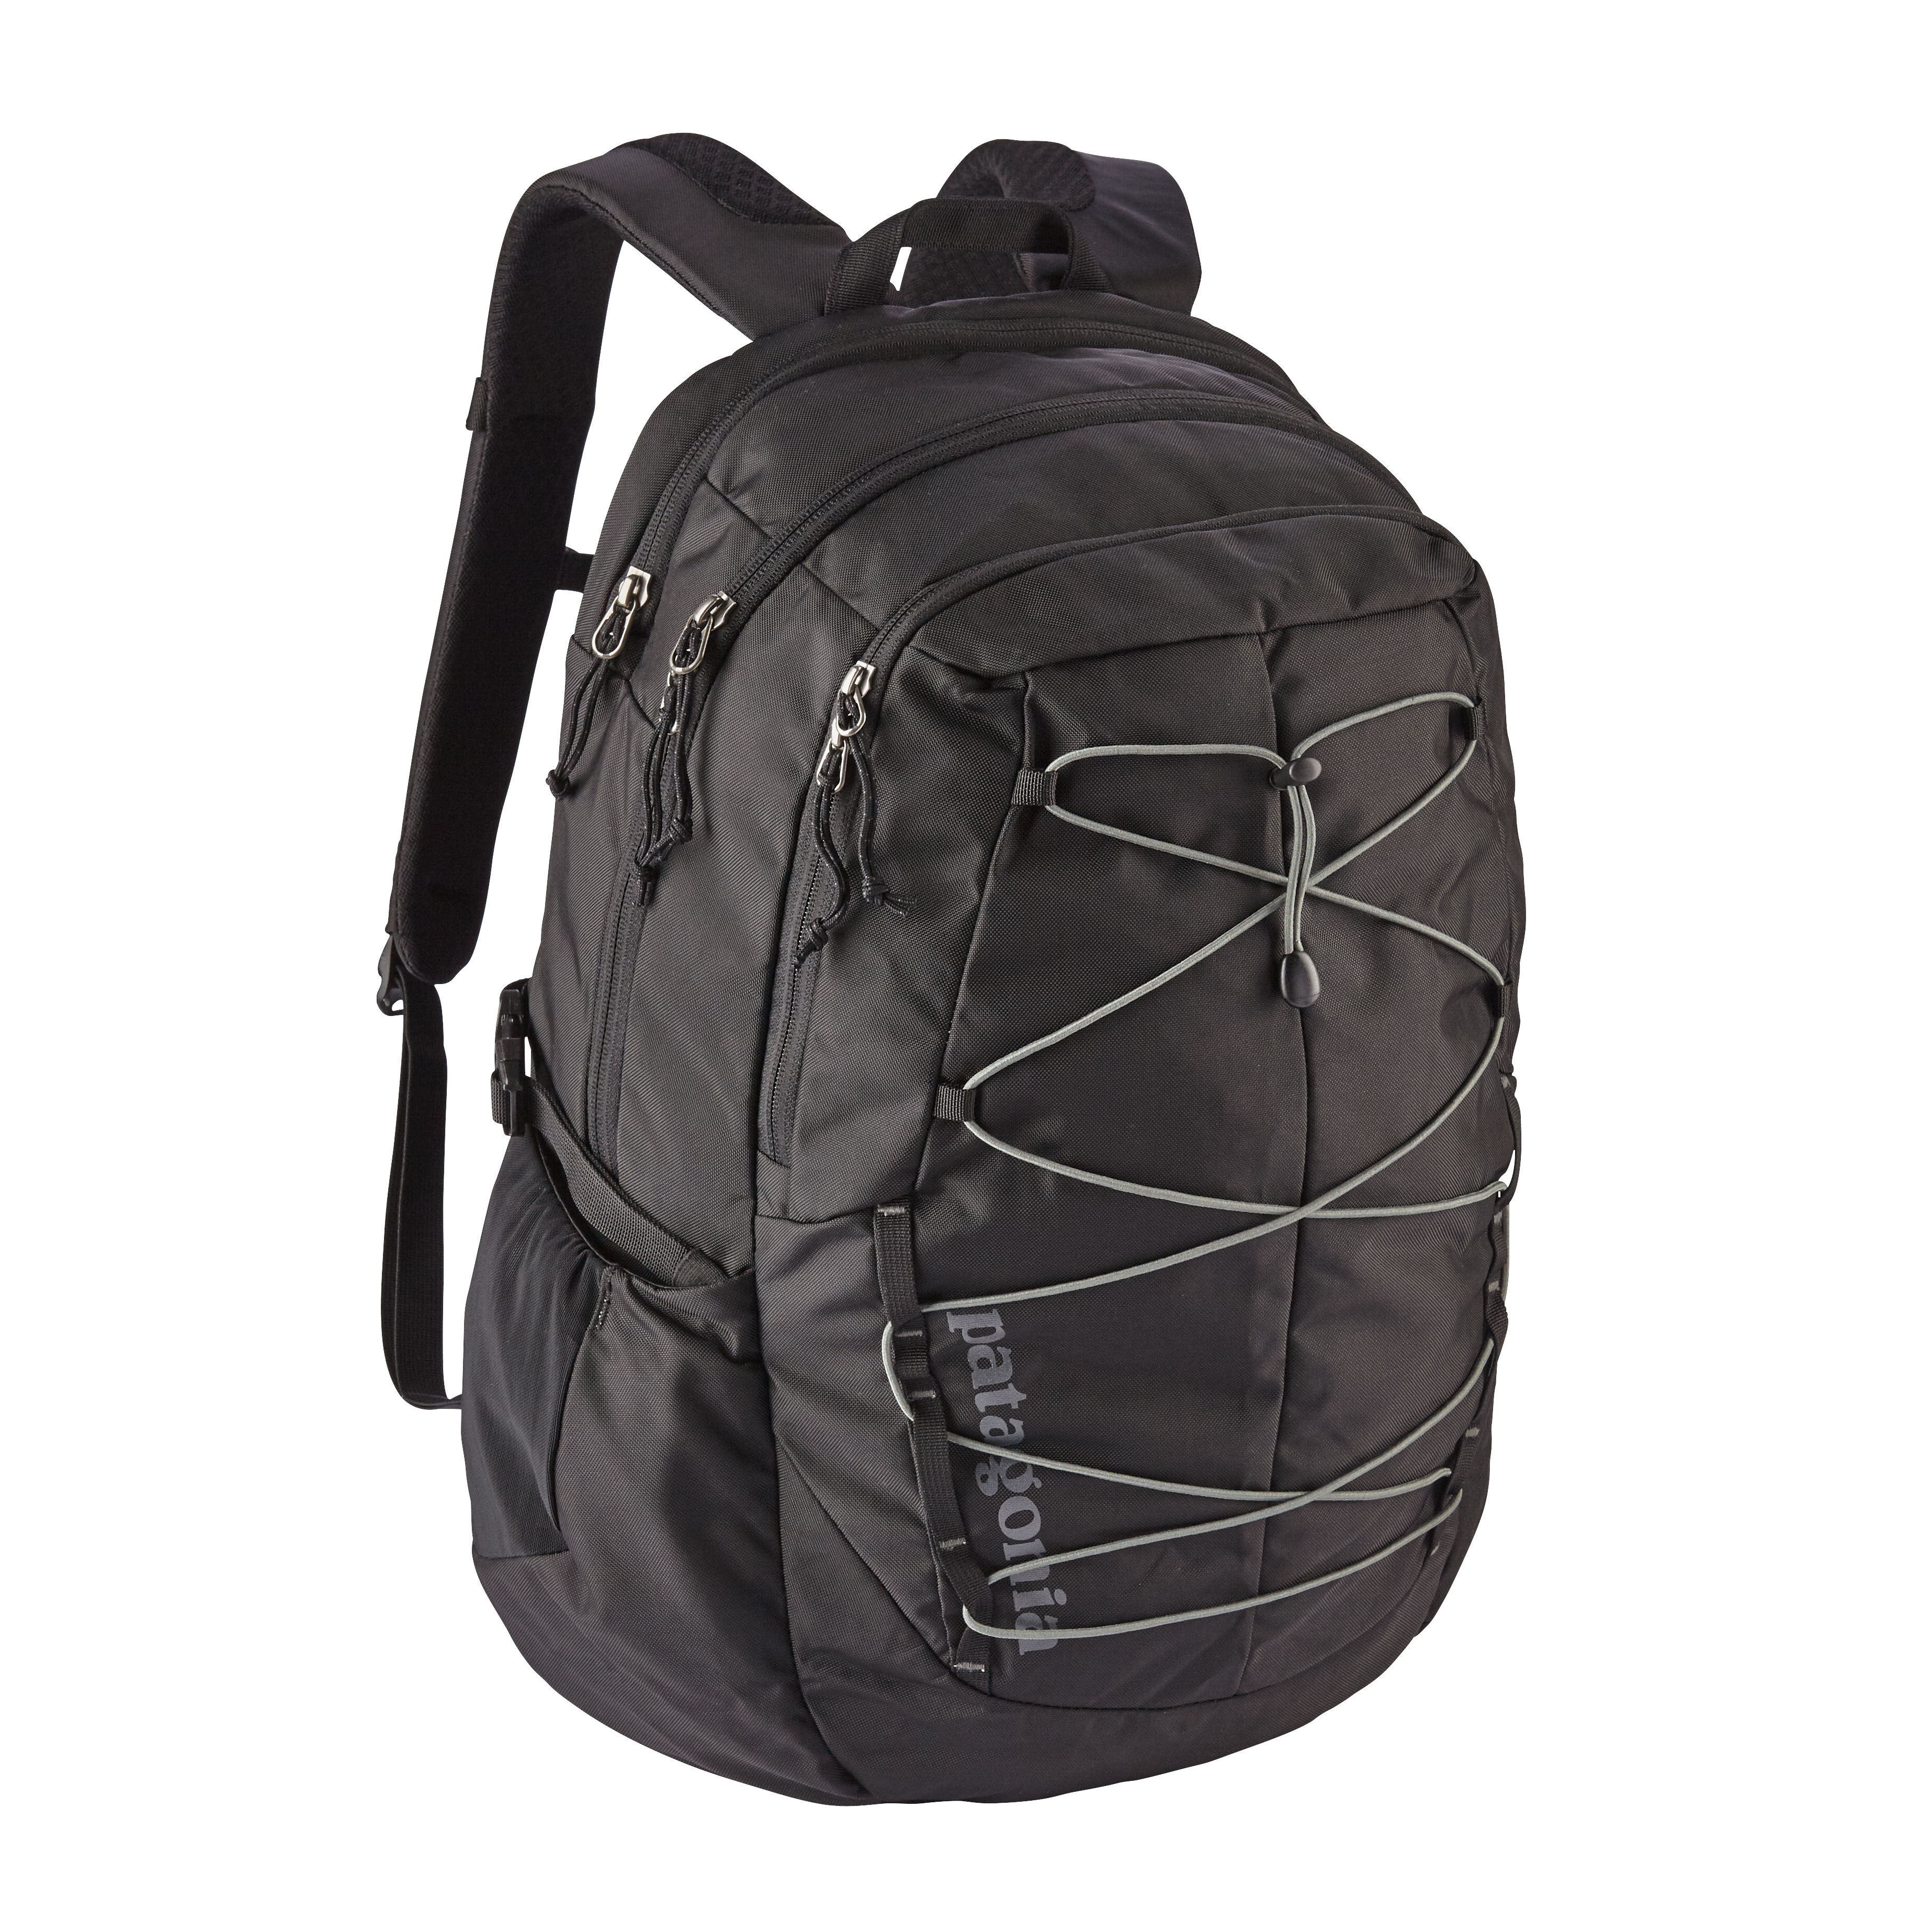 Patagonia Chacabuco Pack 30L - Backpack